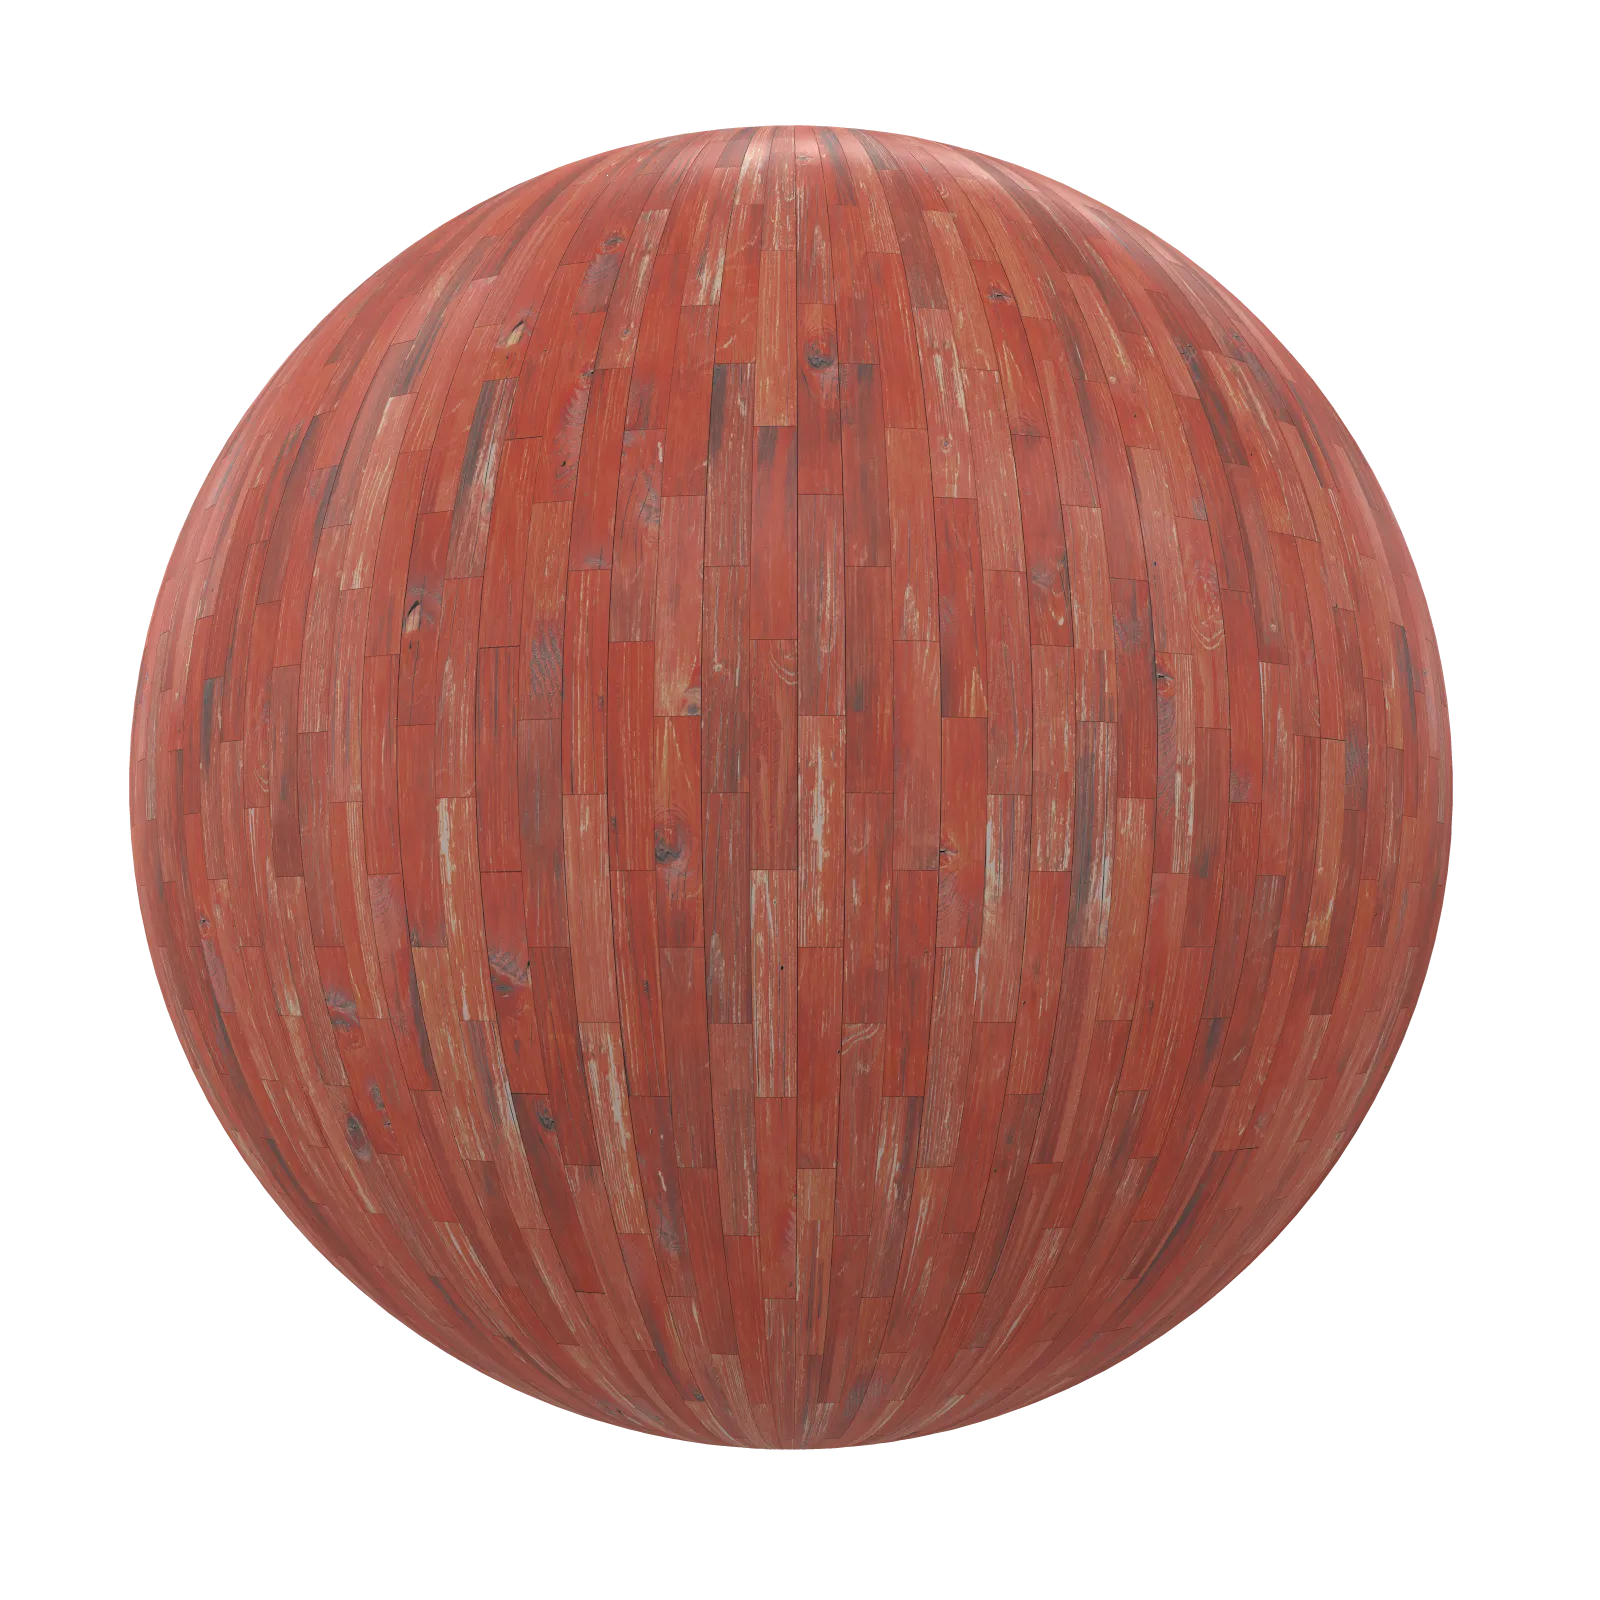 TEXTURES – WOOD – Painted Wood Tiles 7